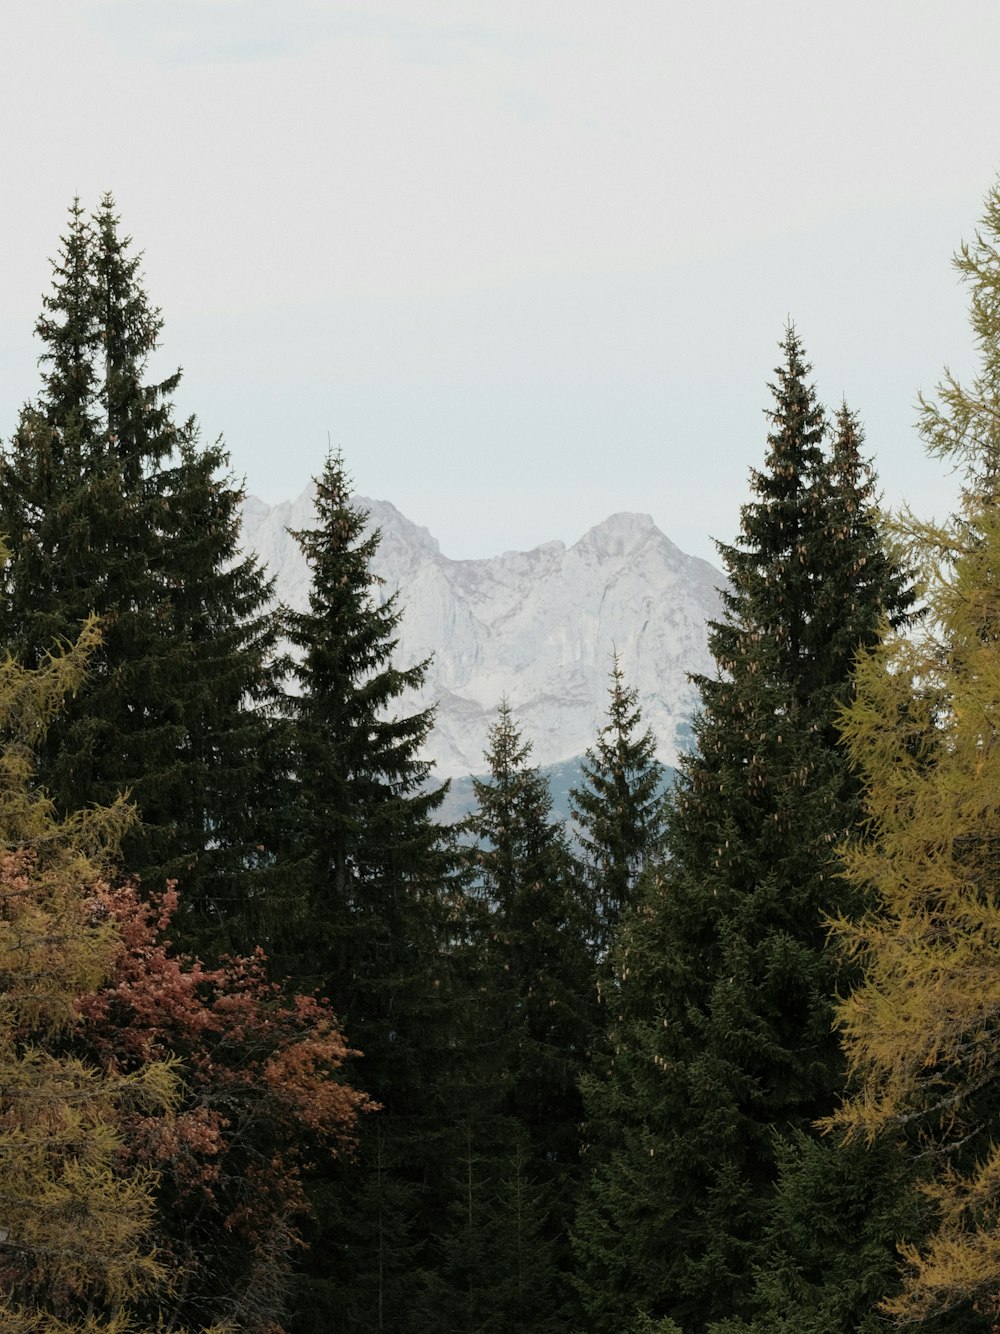 a forest filled with lots of trees and a mountain in the background